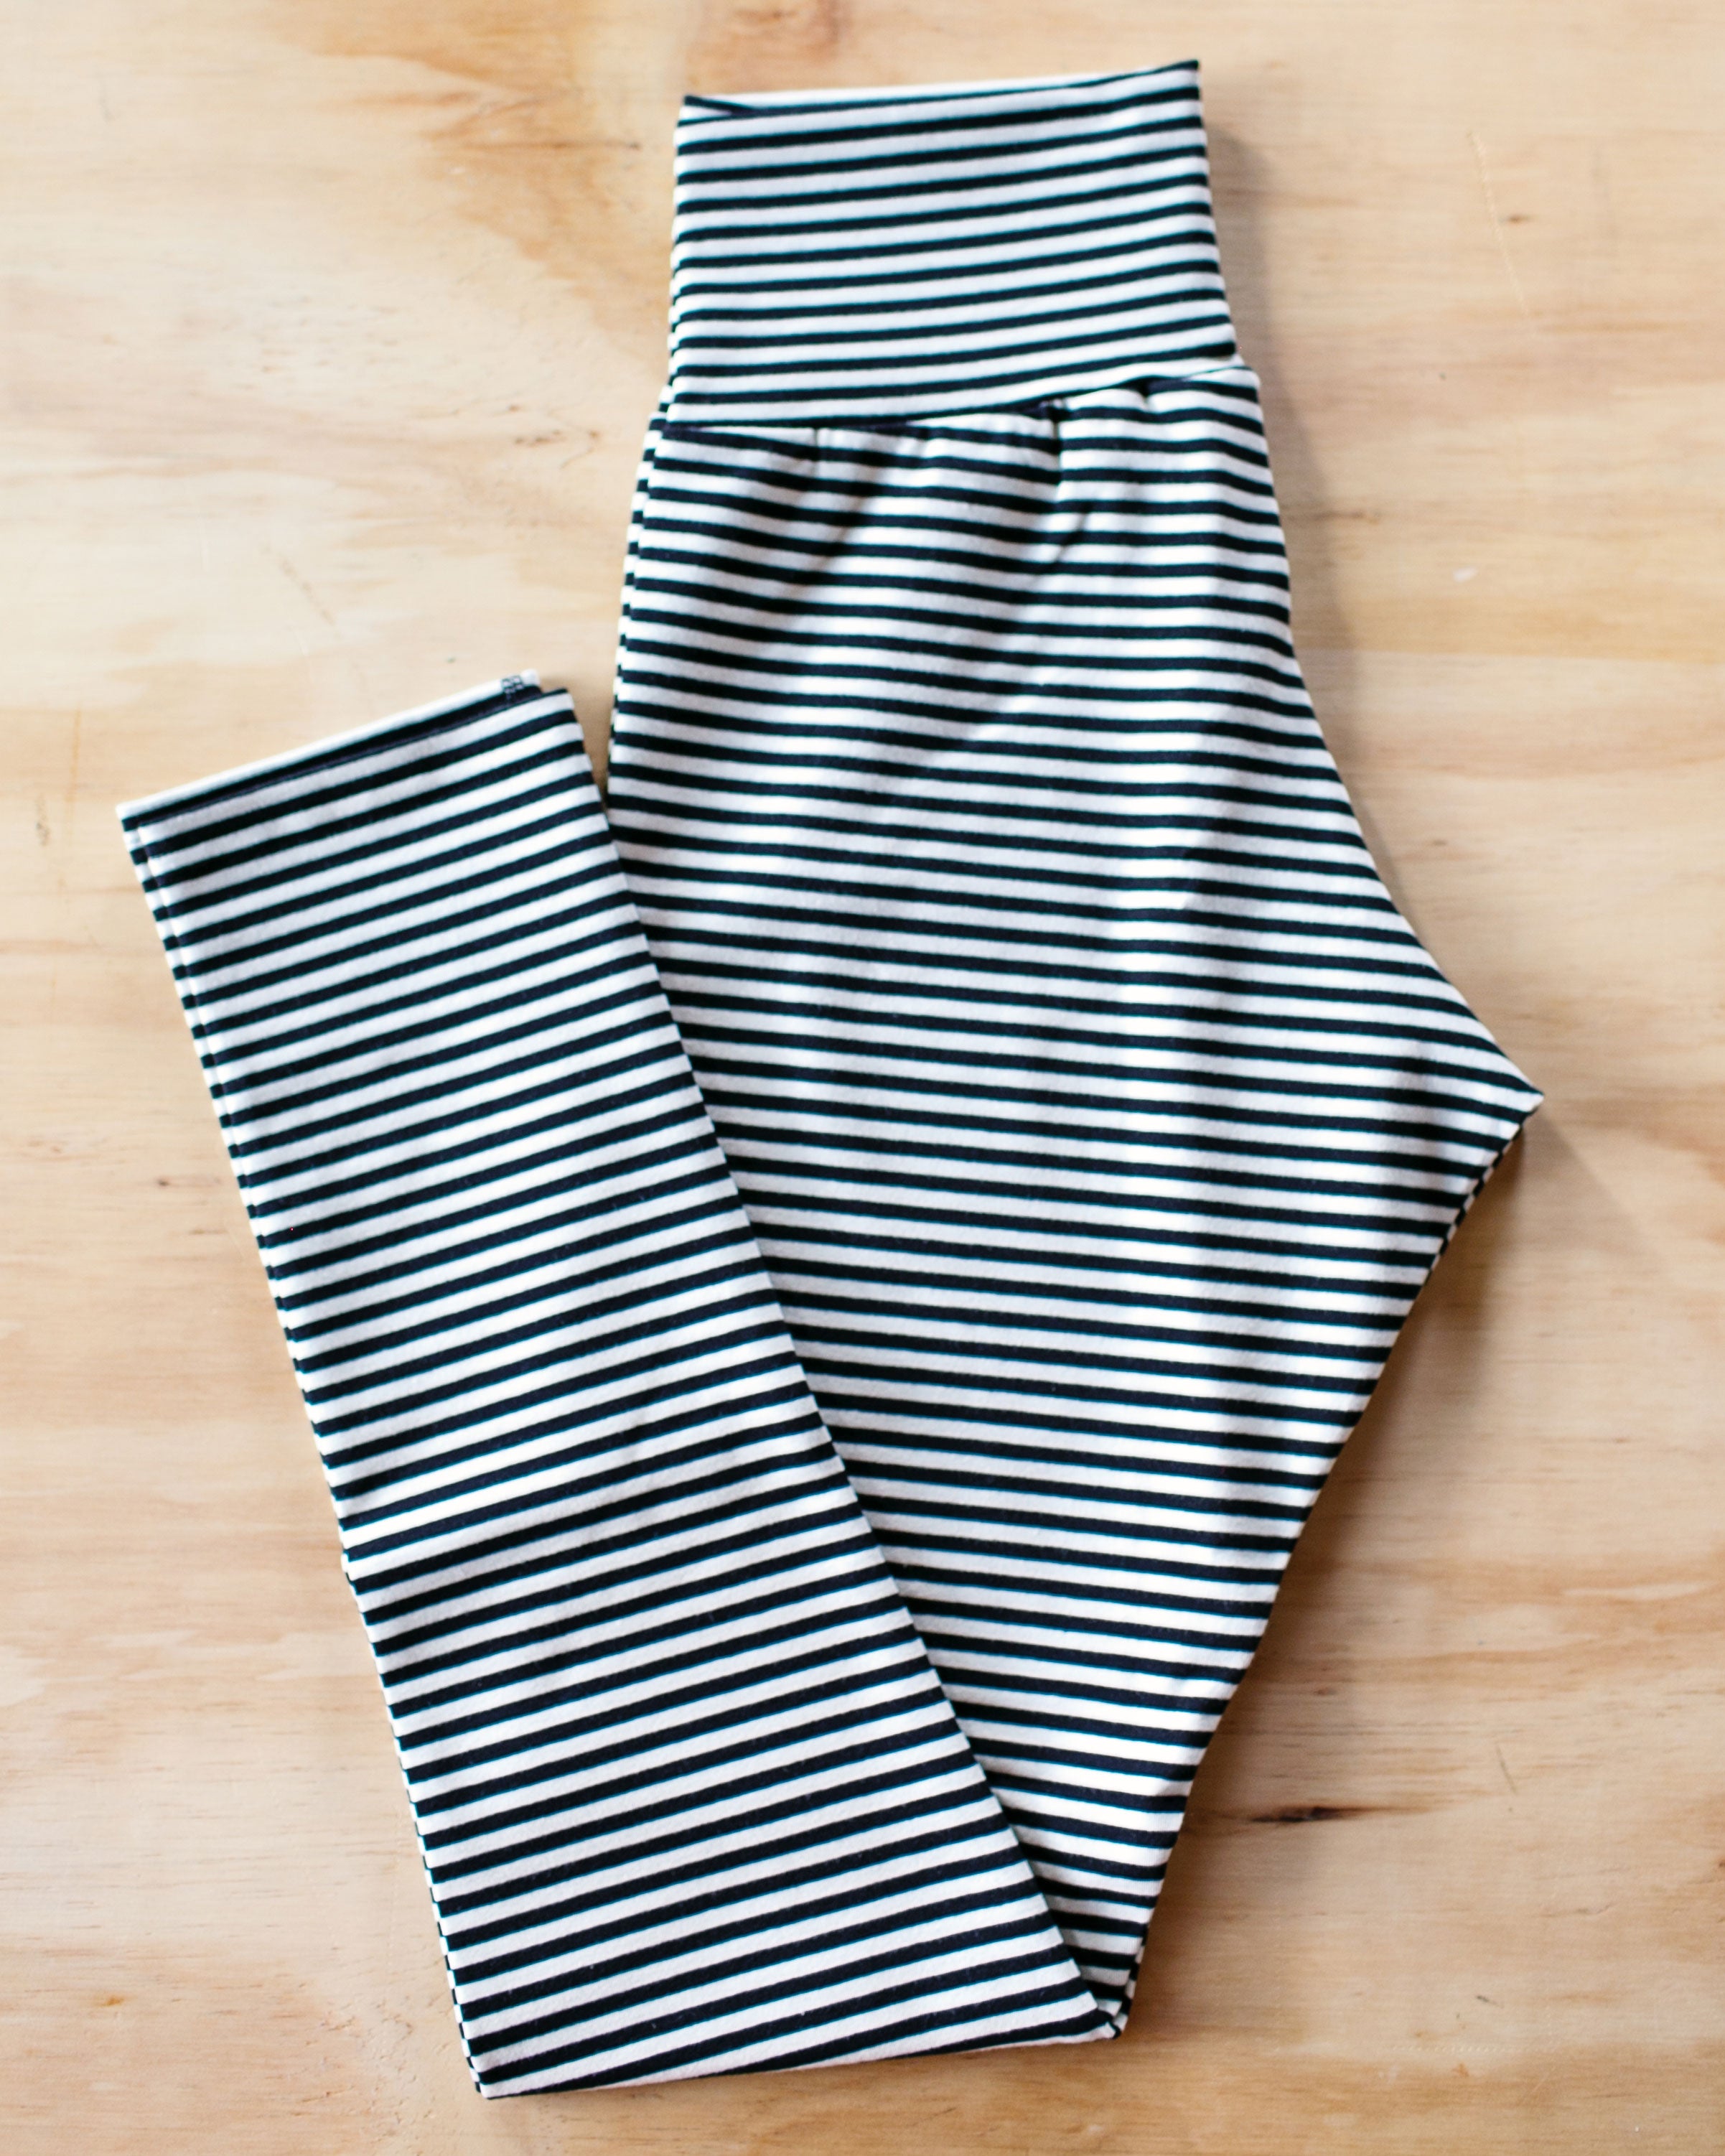 Flat lay of Thunderpants organic cotton High Rise Leggings in Black and White Stripes.